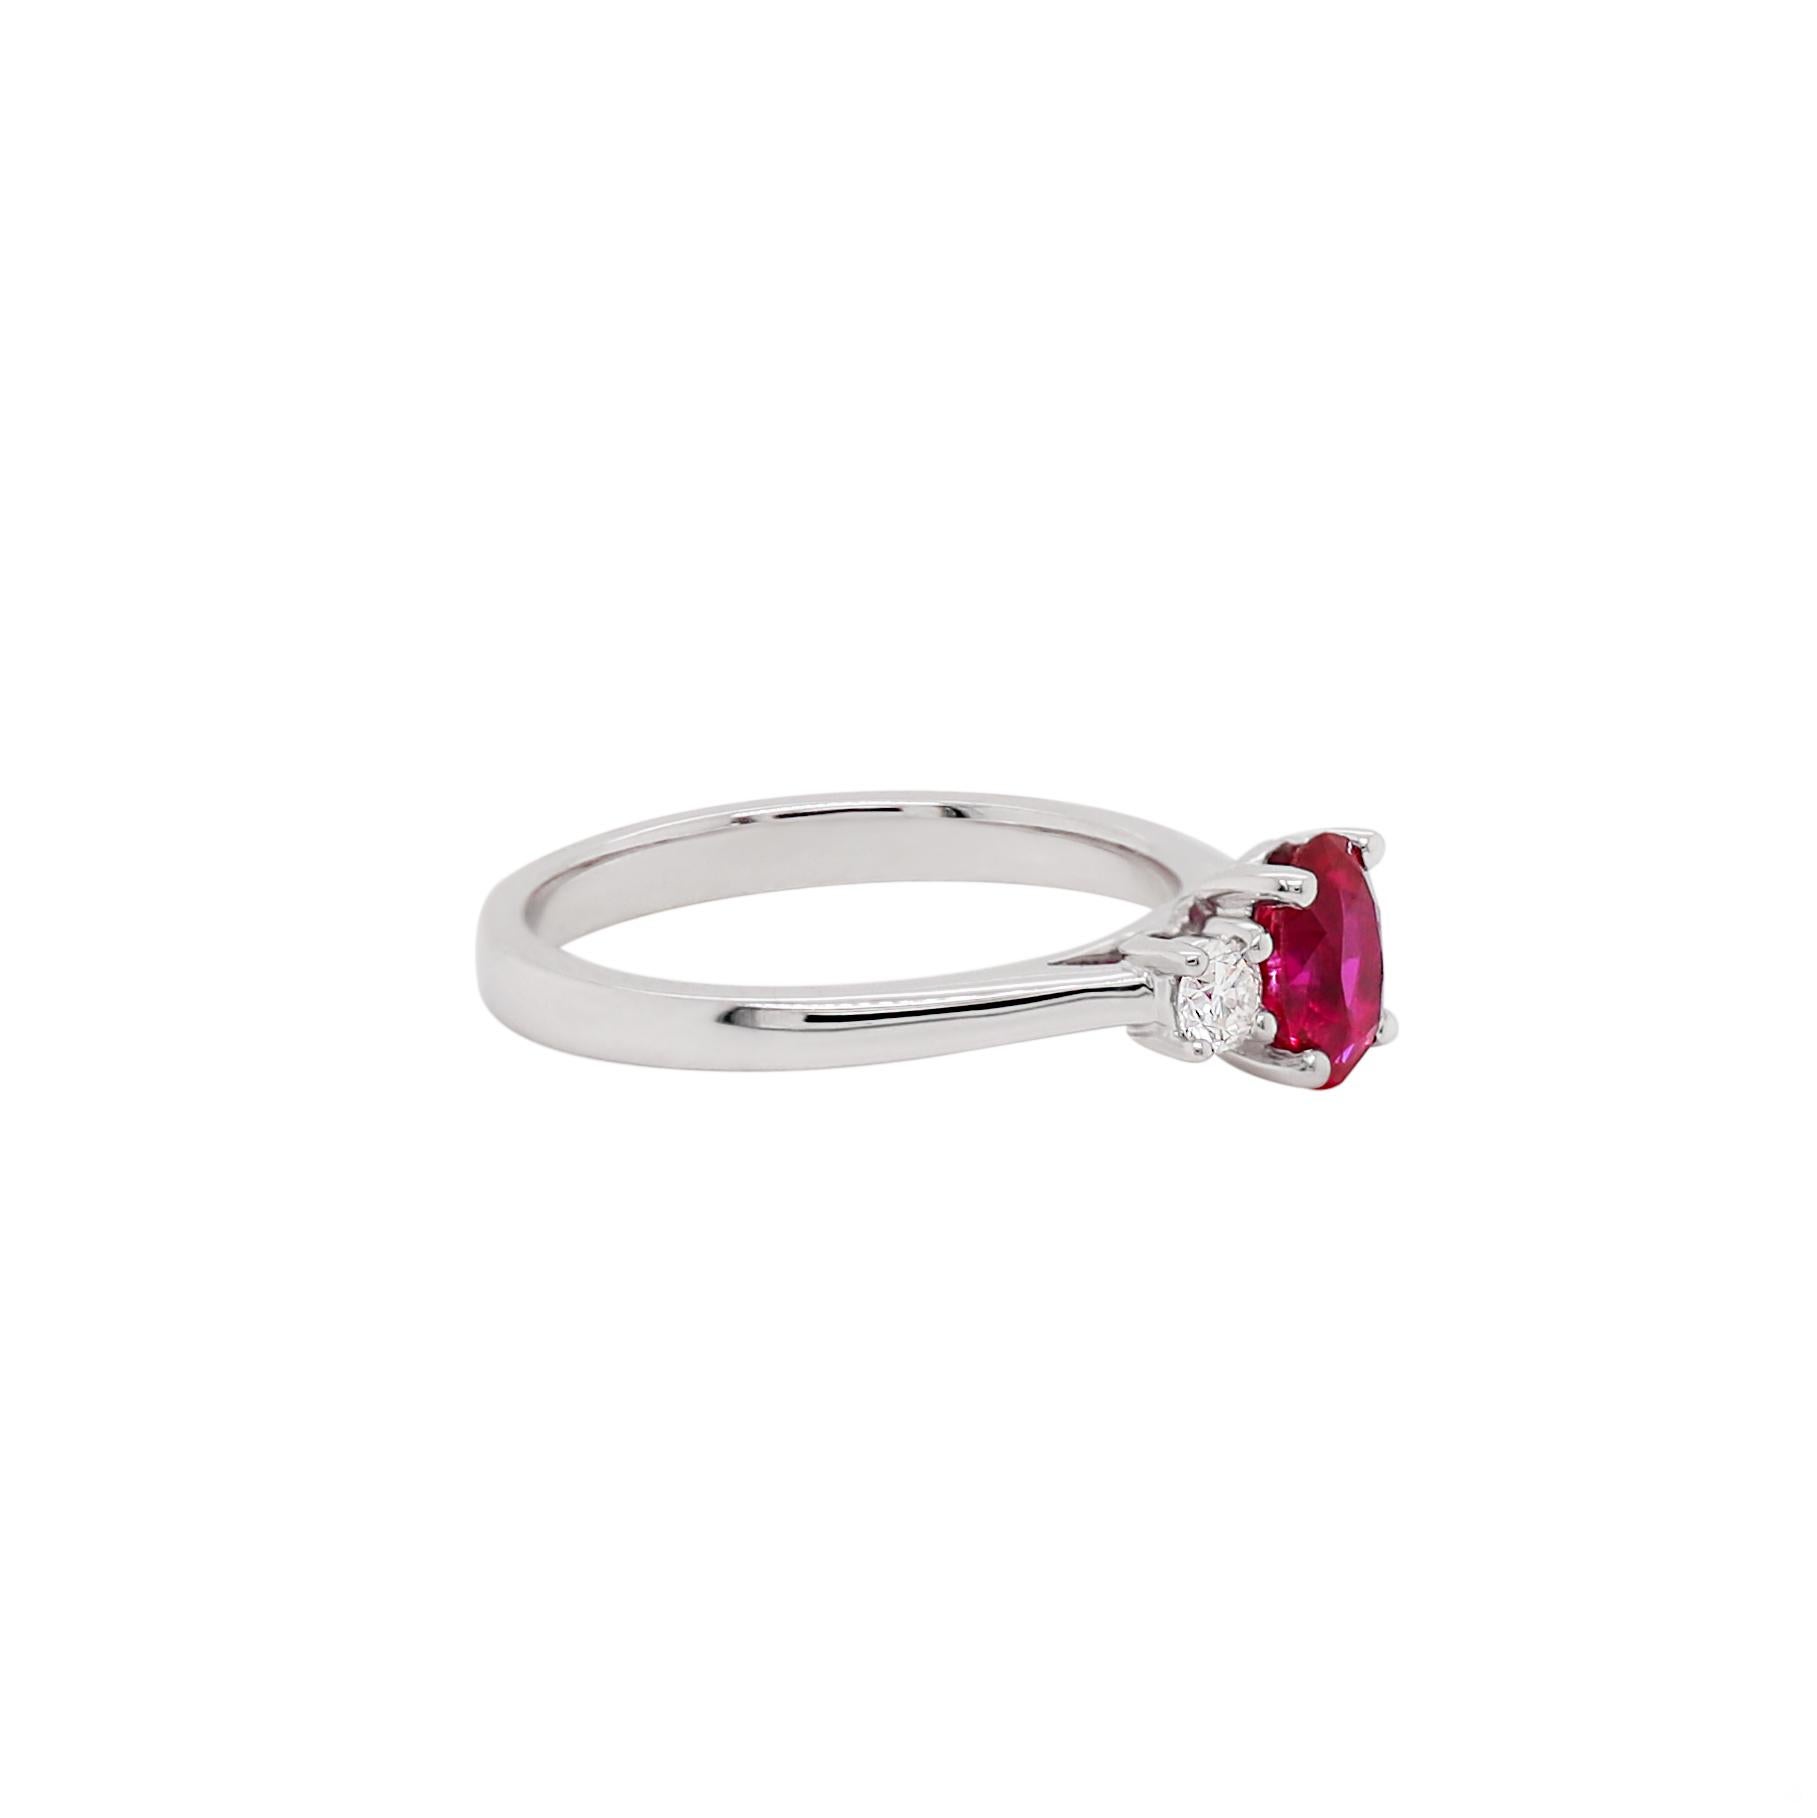 This beautiful three-stone ring features a natural unheated oval shape ruby weighing 1.05 carat in a four claw, open back setting. This lovely stone is accompanied by two round brilliant cut diamonds on either side with a combined weight of 0.22ct